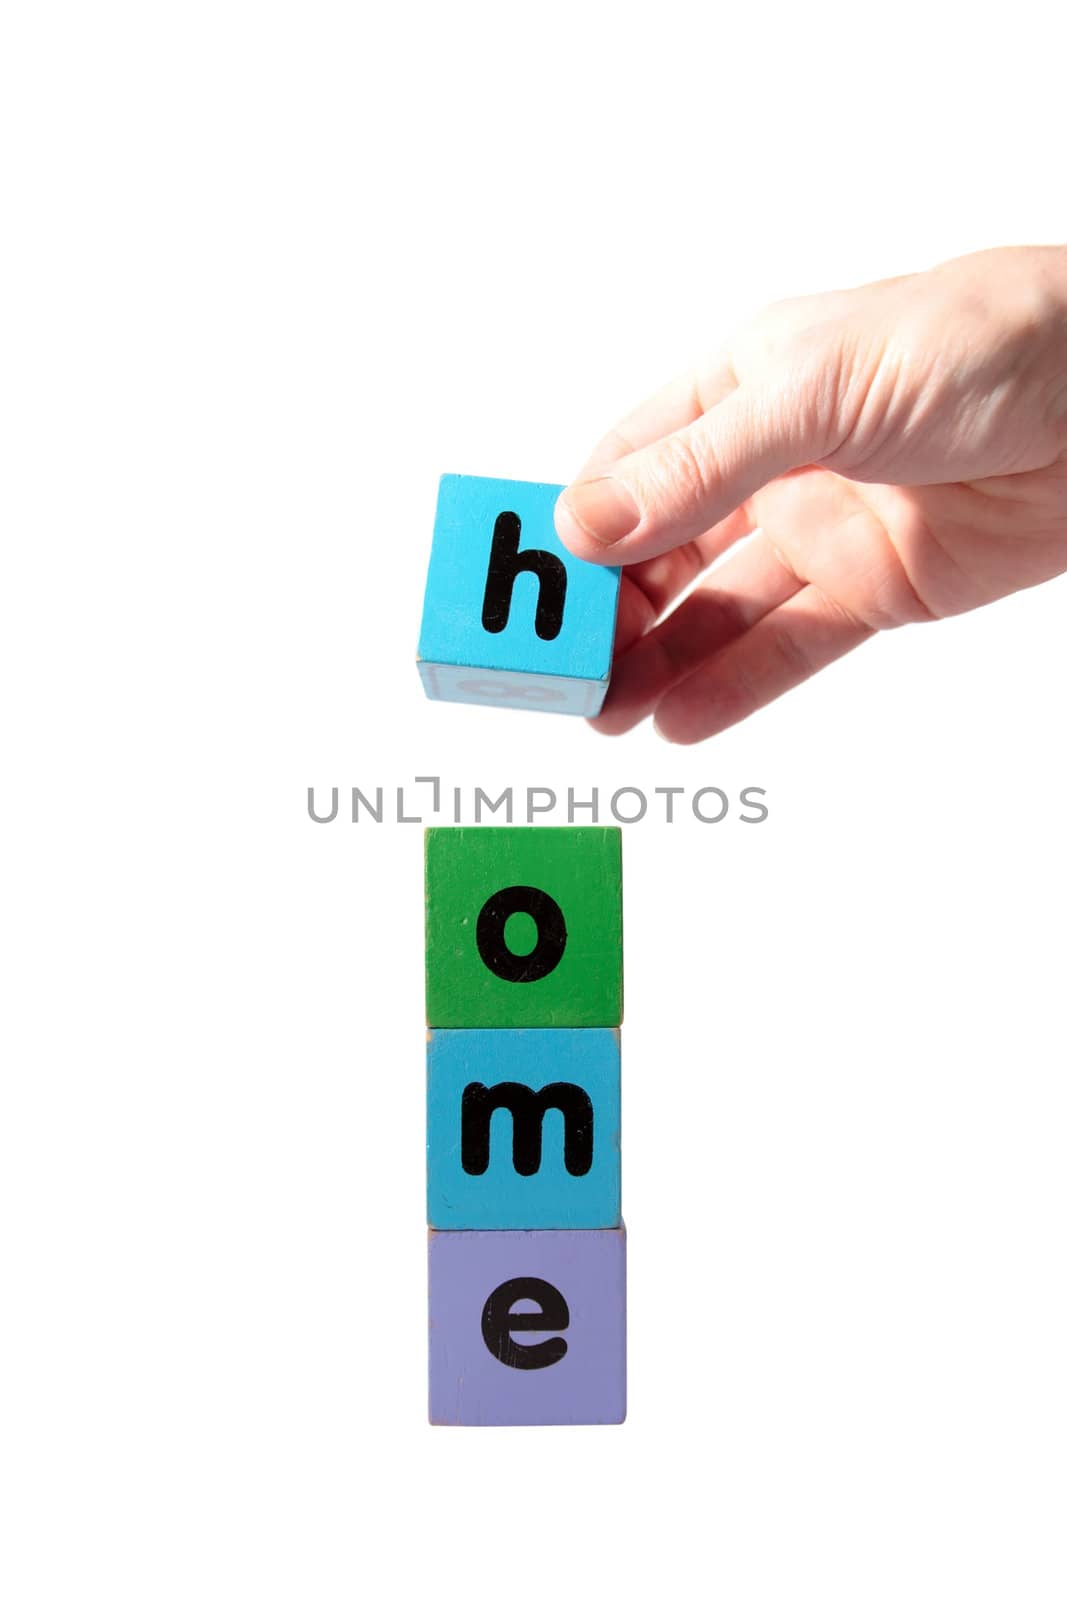 toy letters that spell home against a white background with clipping path with hand